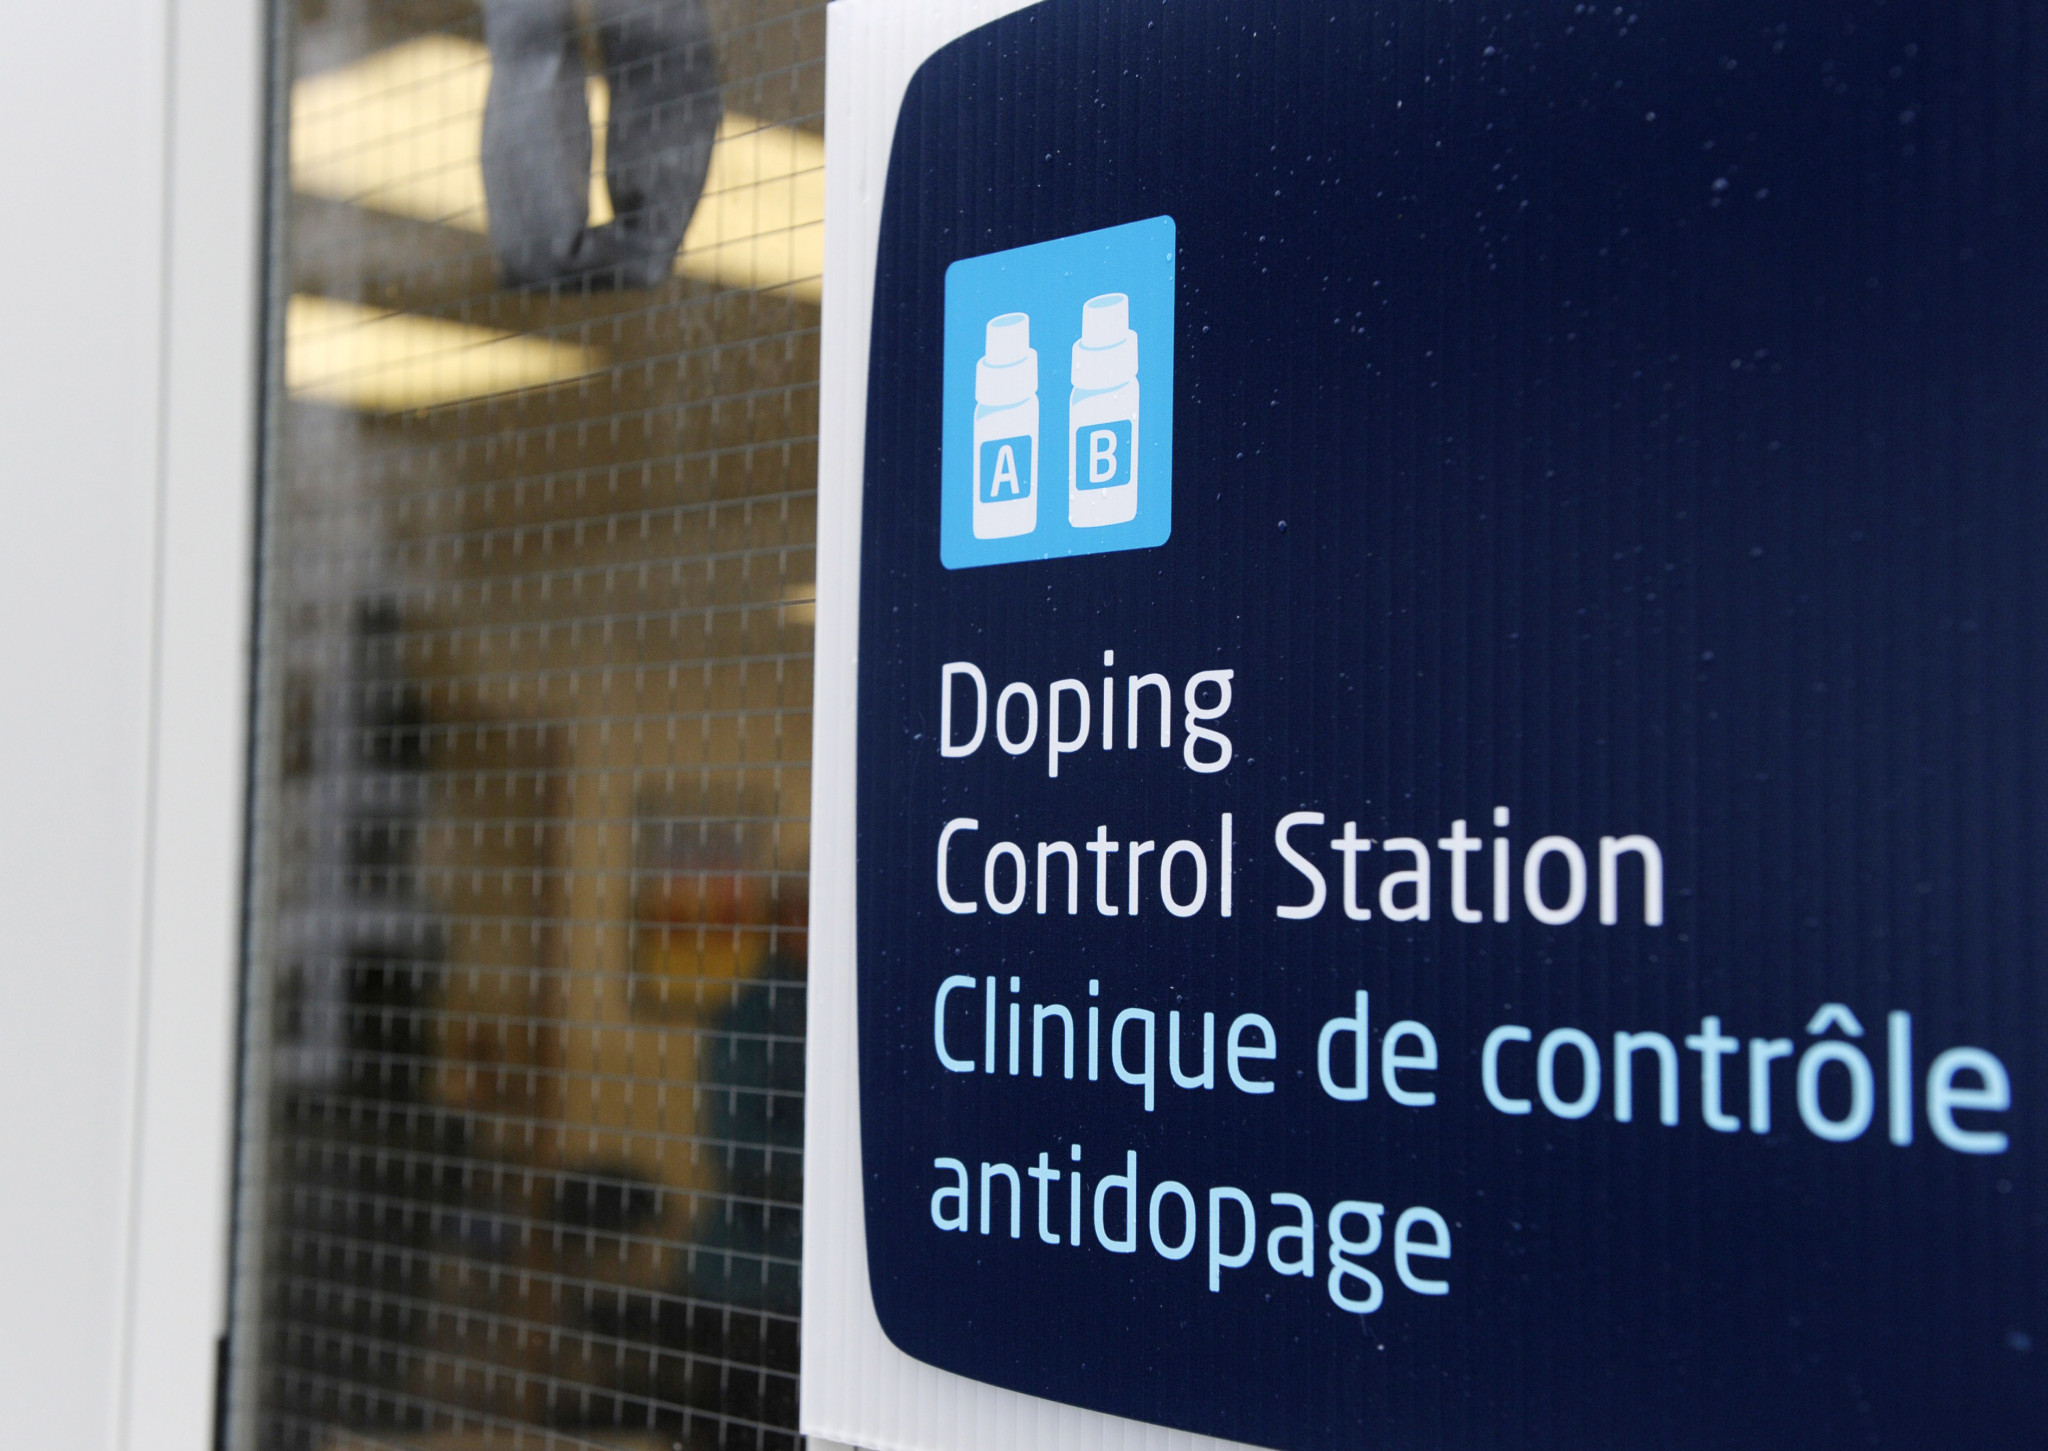 Canada to resume anti-doping tests with supplemental safety measures in place